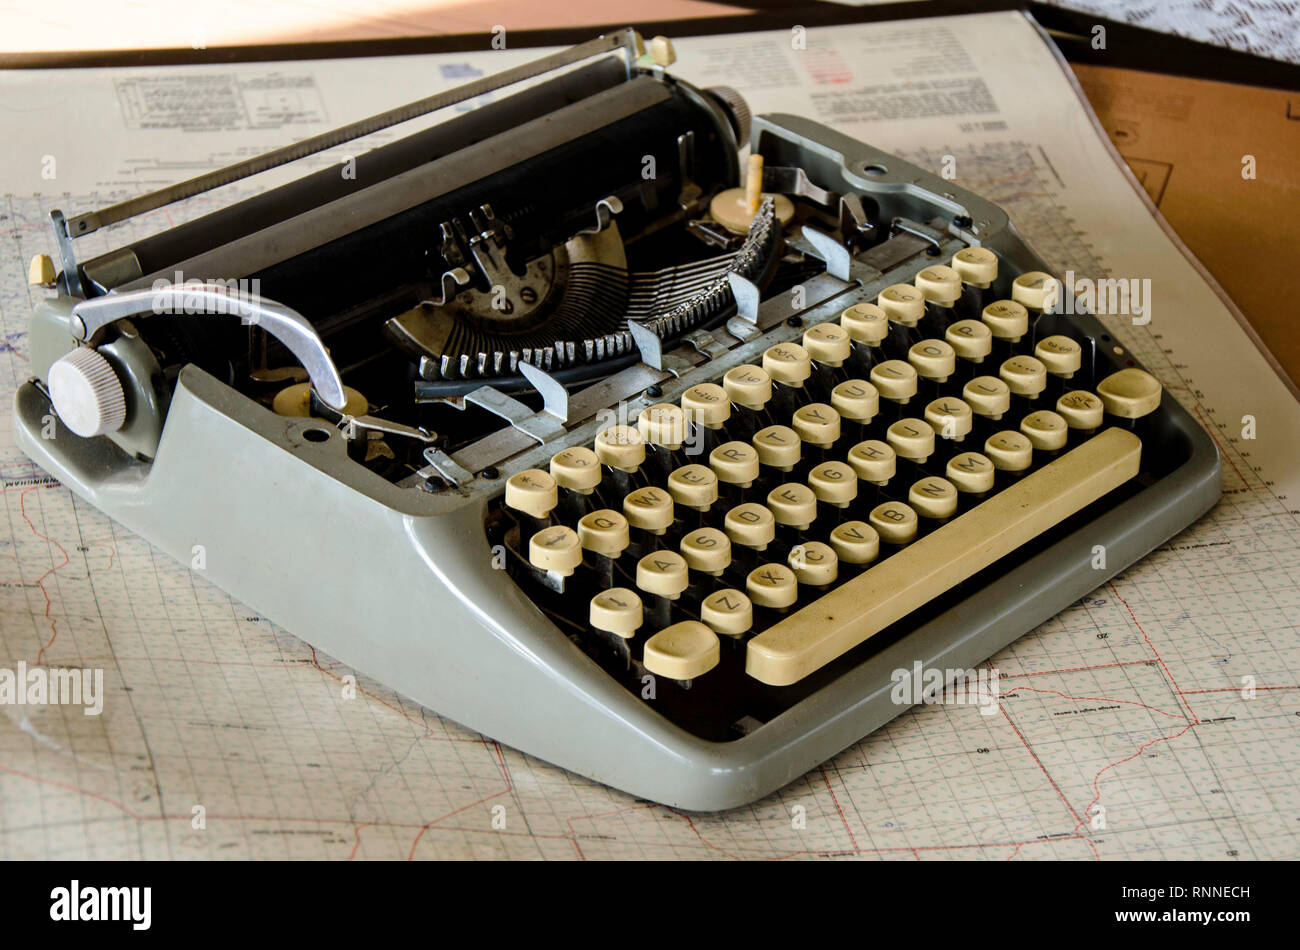 An old typewriter sitting on a map in an office Stock Photo